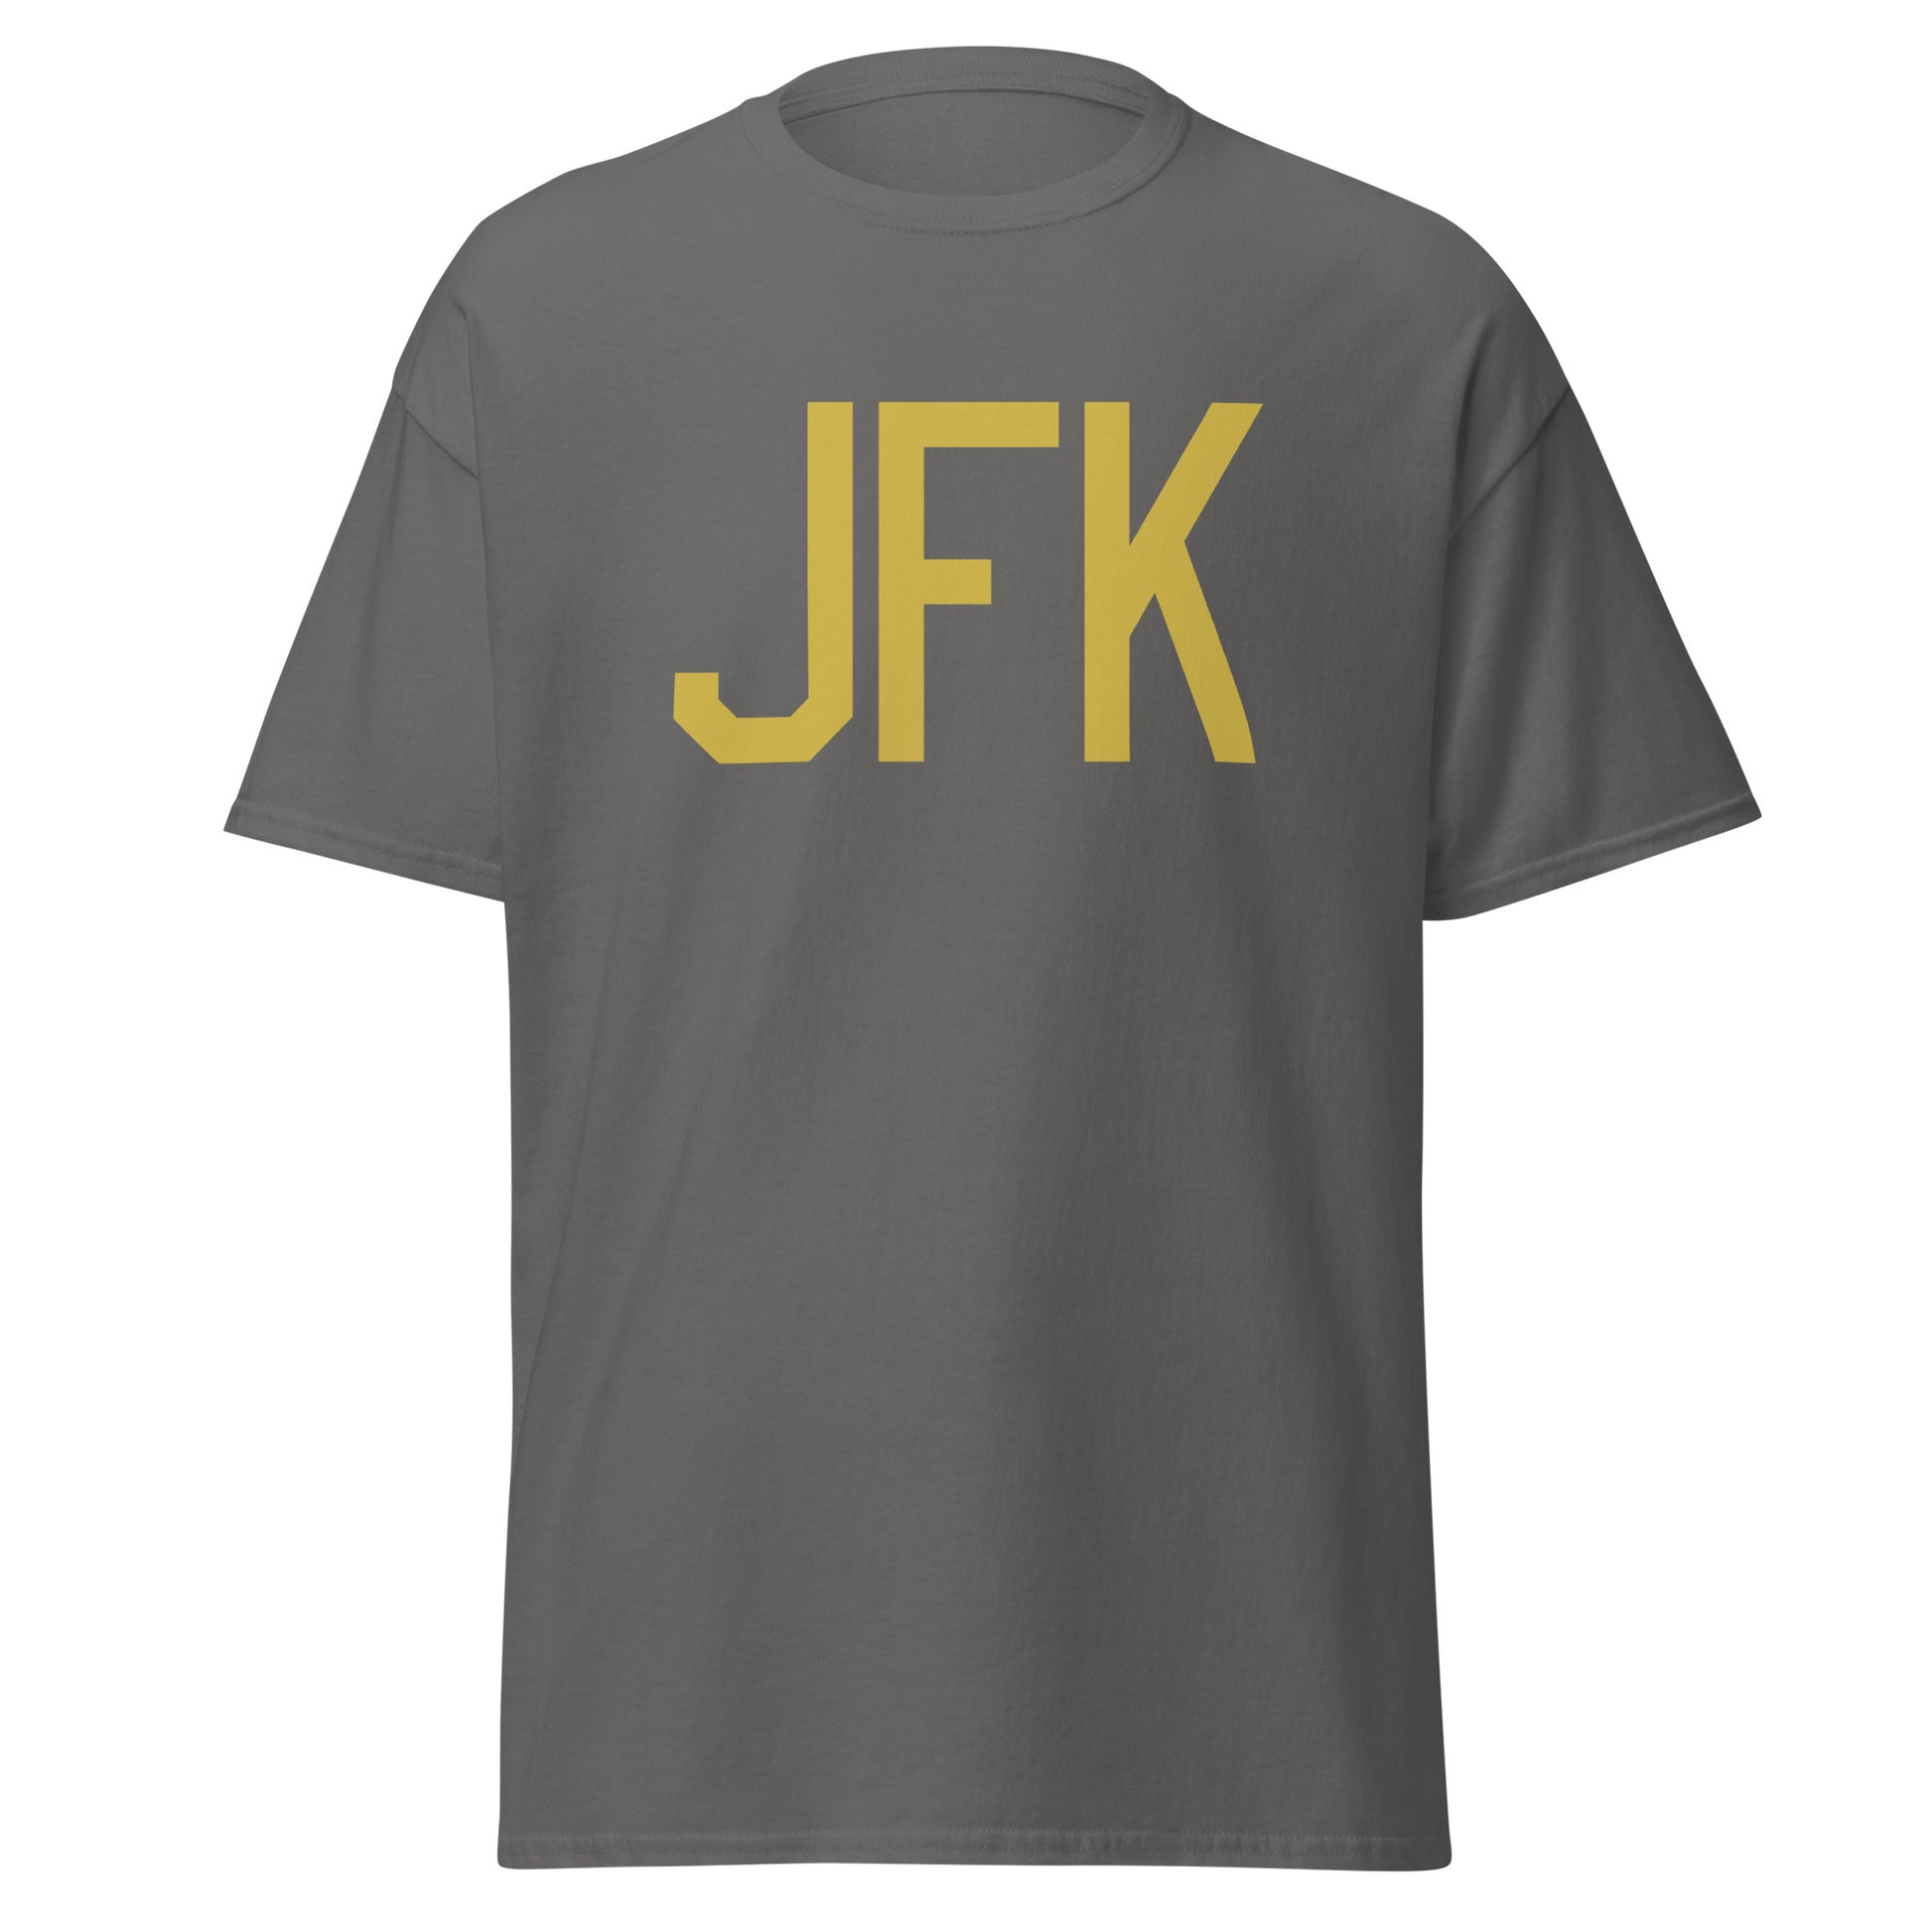 Aviation Enthusiast Men's Tee - Old Gold Graphic • JFK New York City • YHM Designs - Image 05